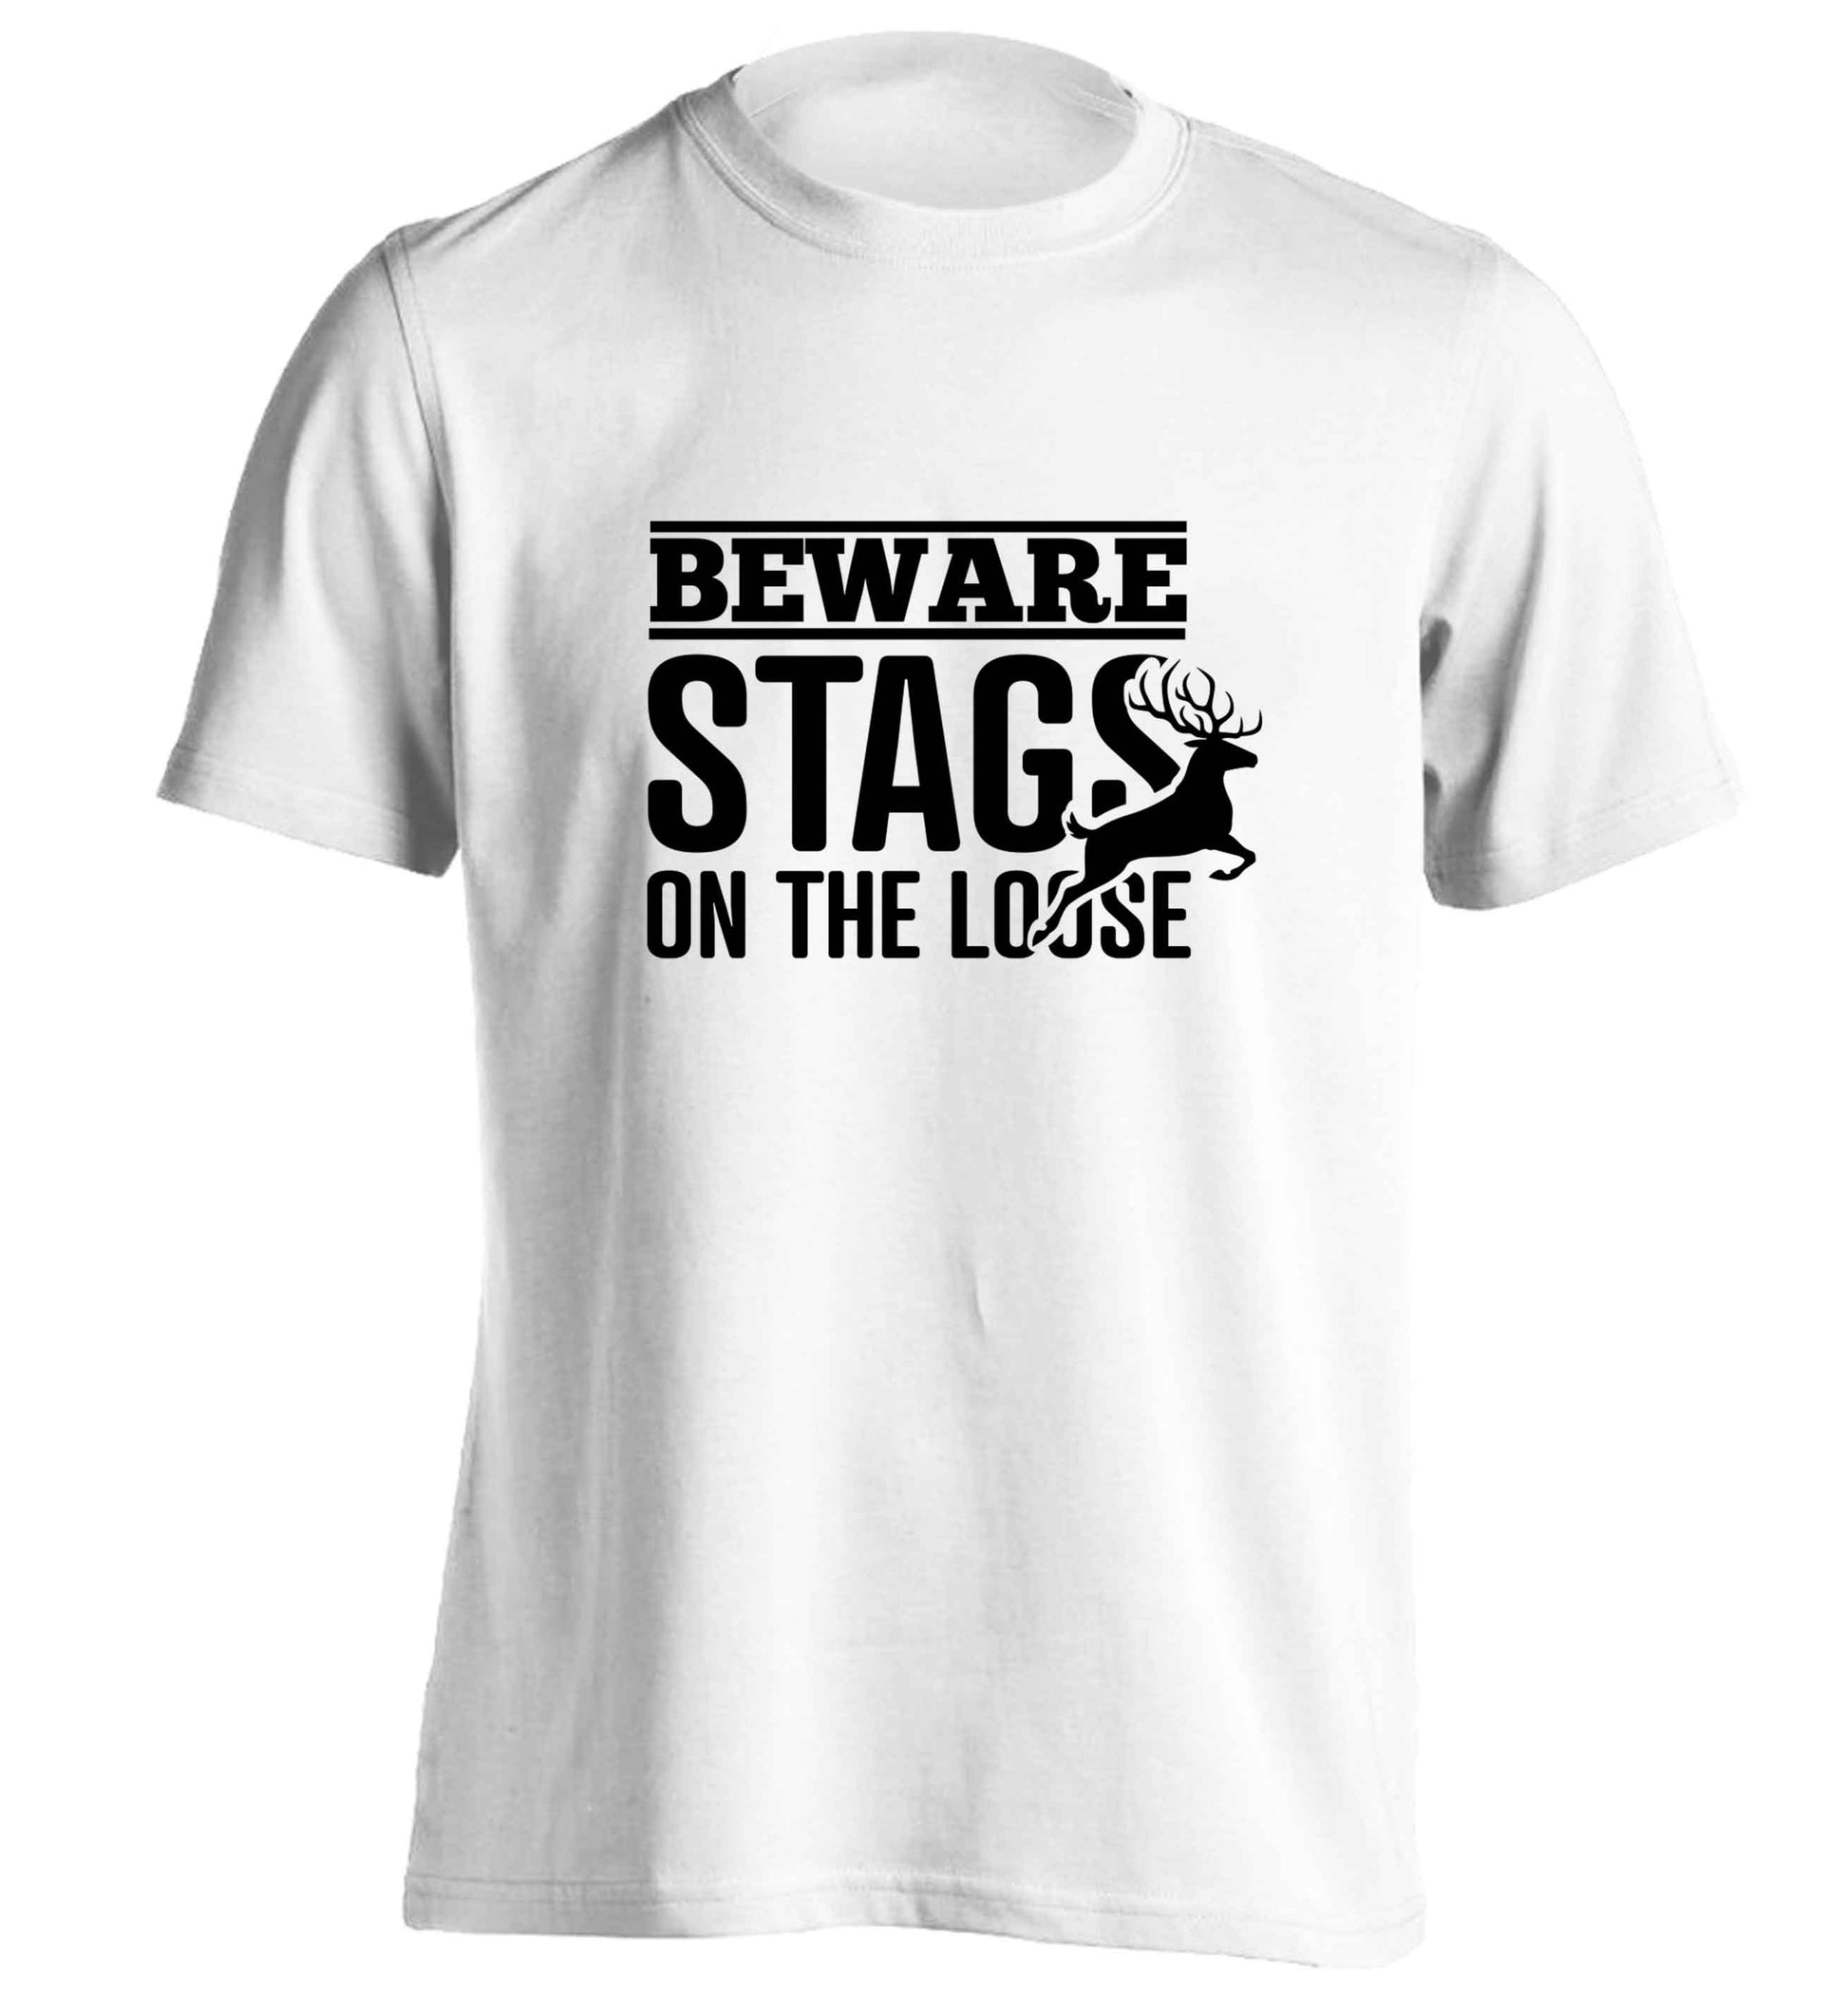 Beware stags on the loose adults unisex white Tshirt 2XL